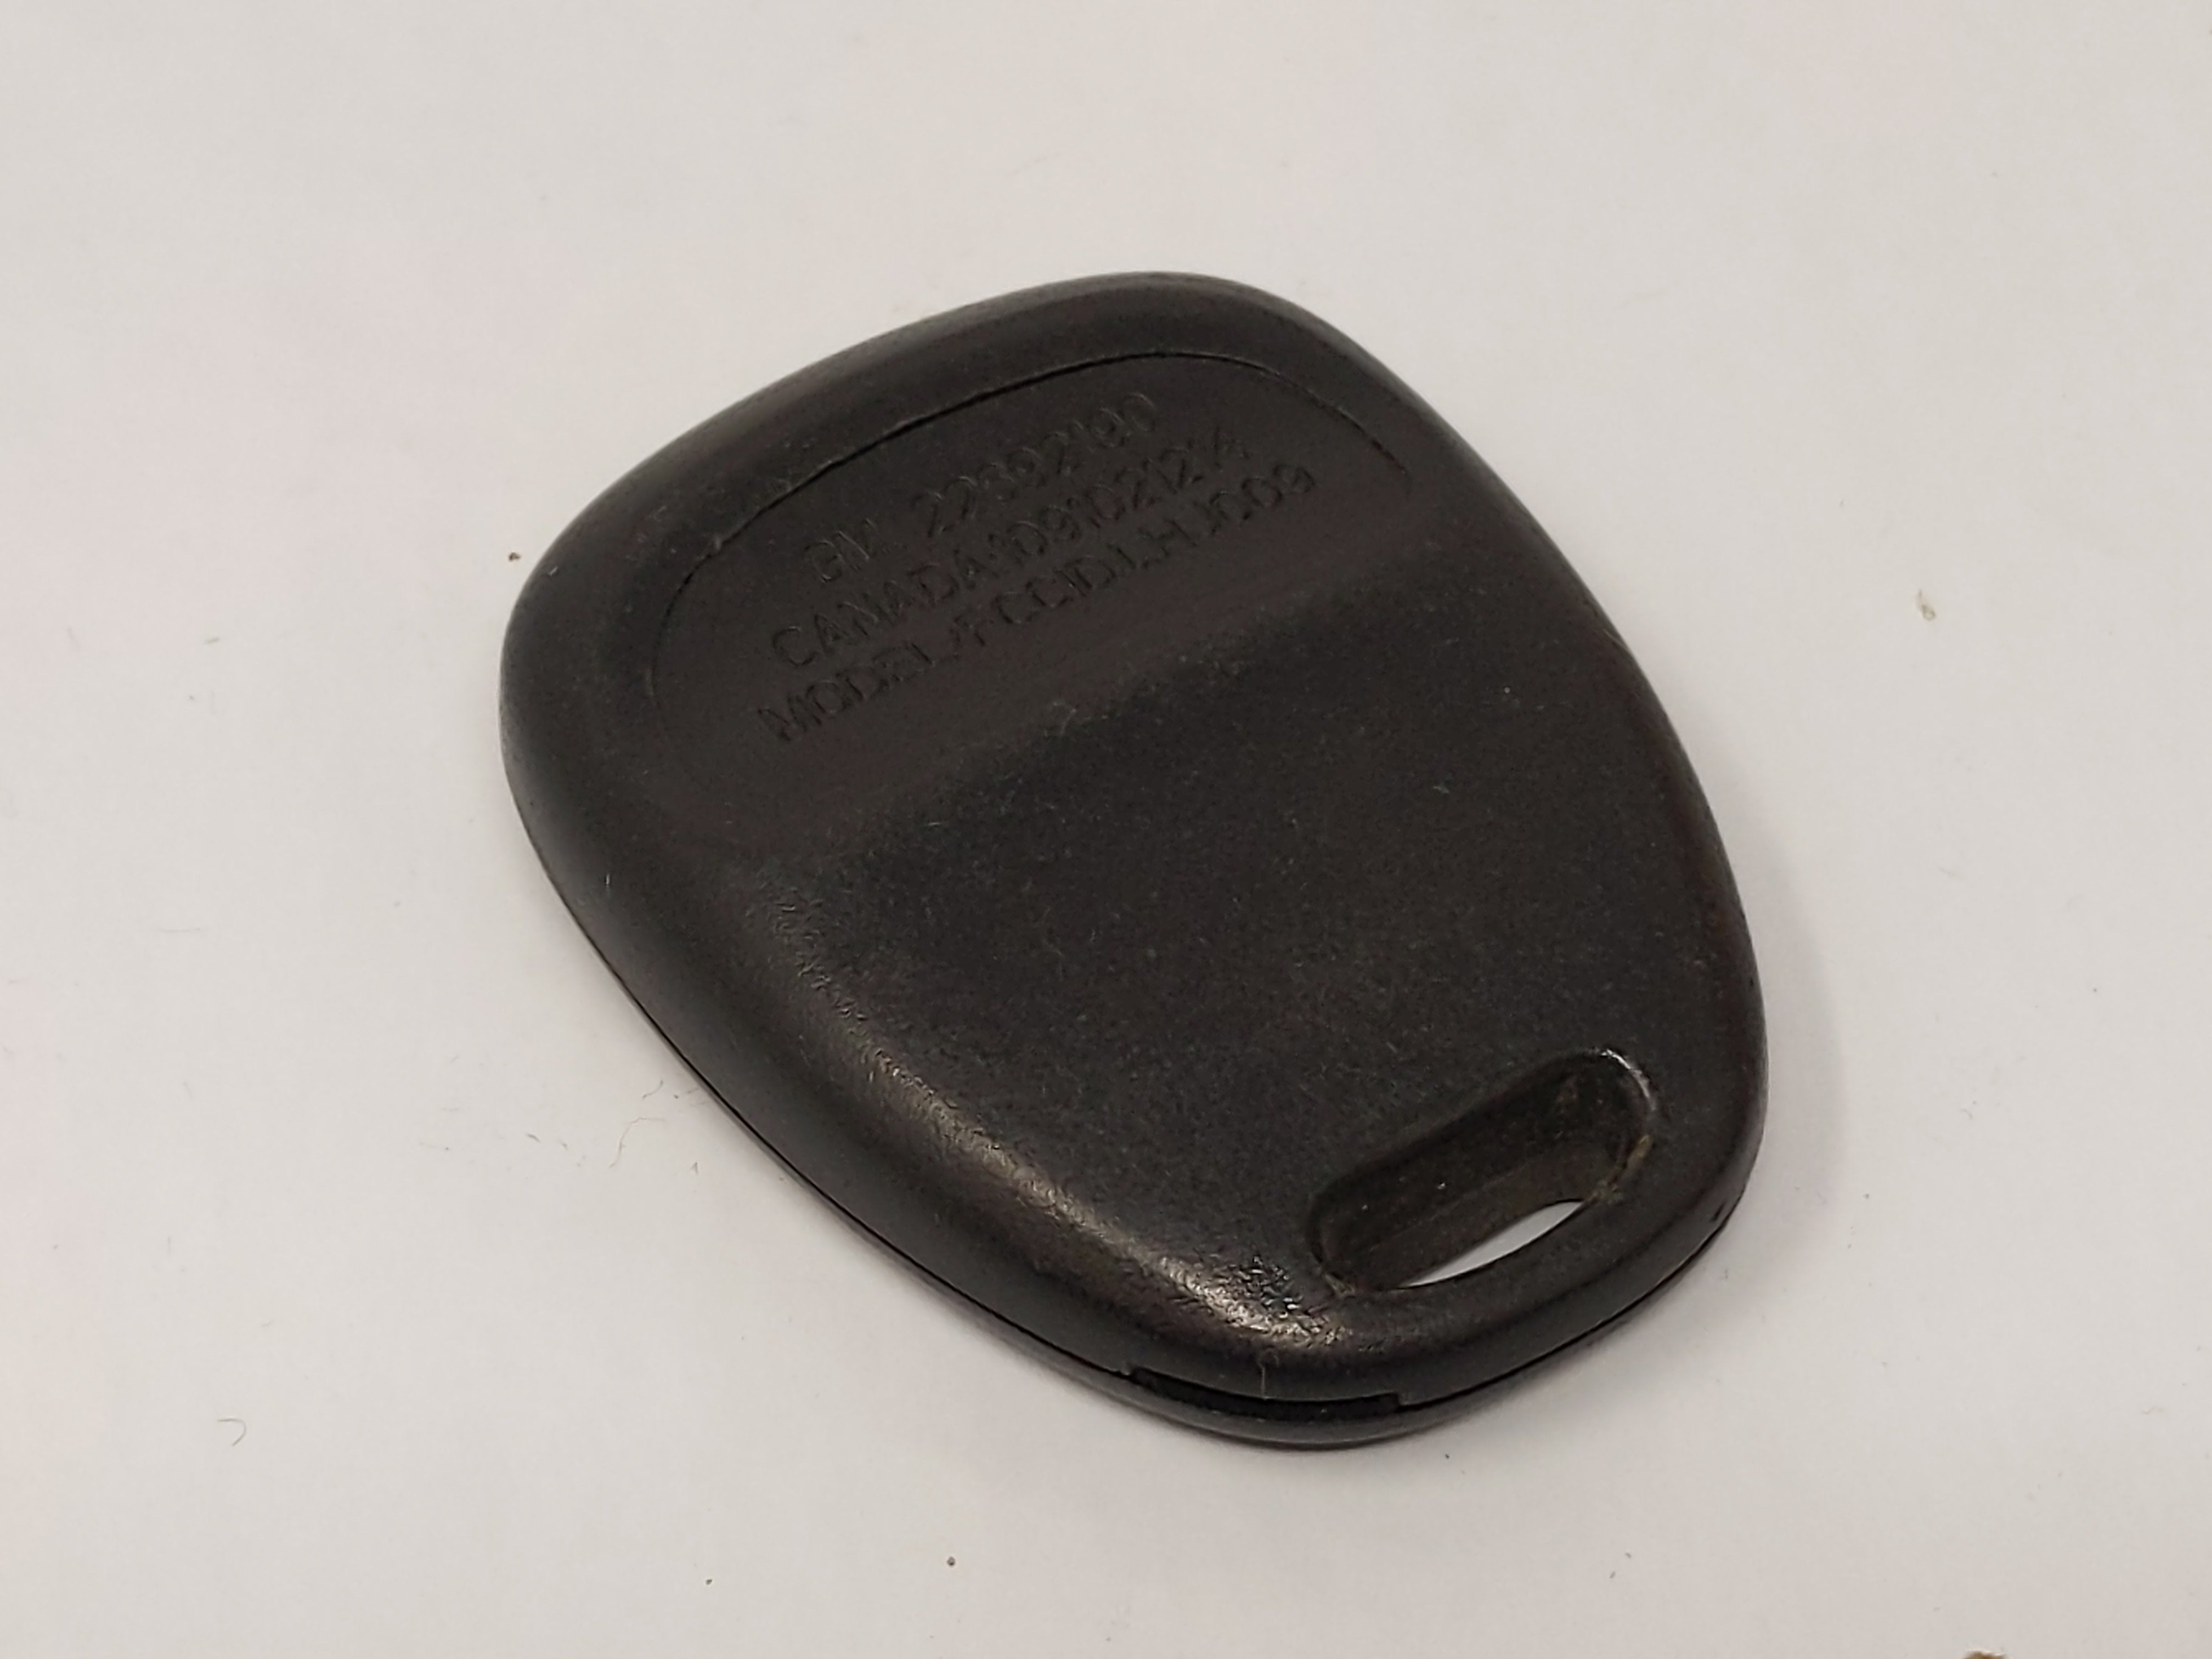 2001-2003 Saturn L200 Keyless Entry Remote Lhj009 22692190 4 Buttons Car - Oemusedautoparts1.com